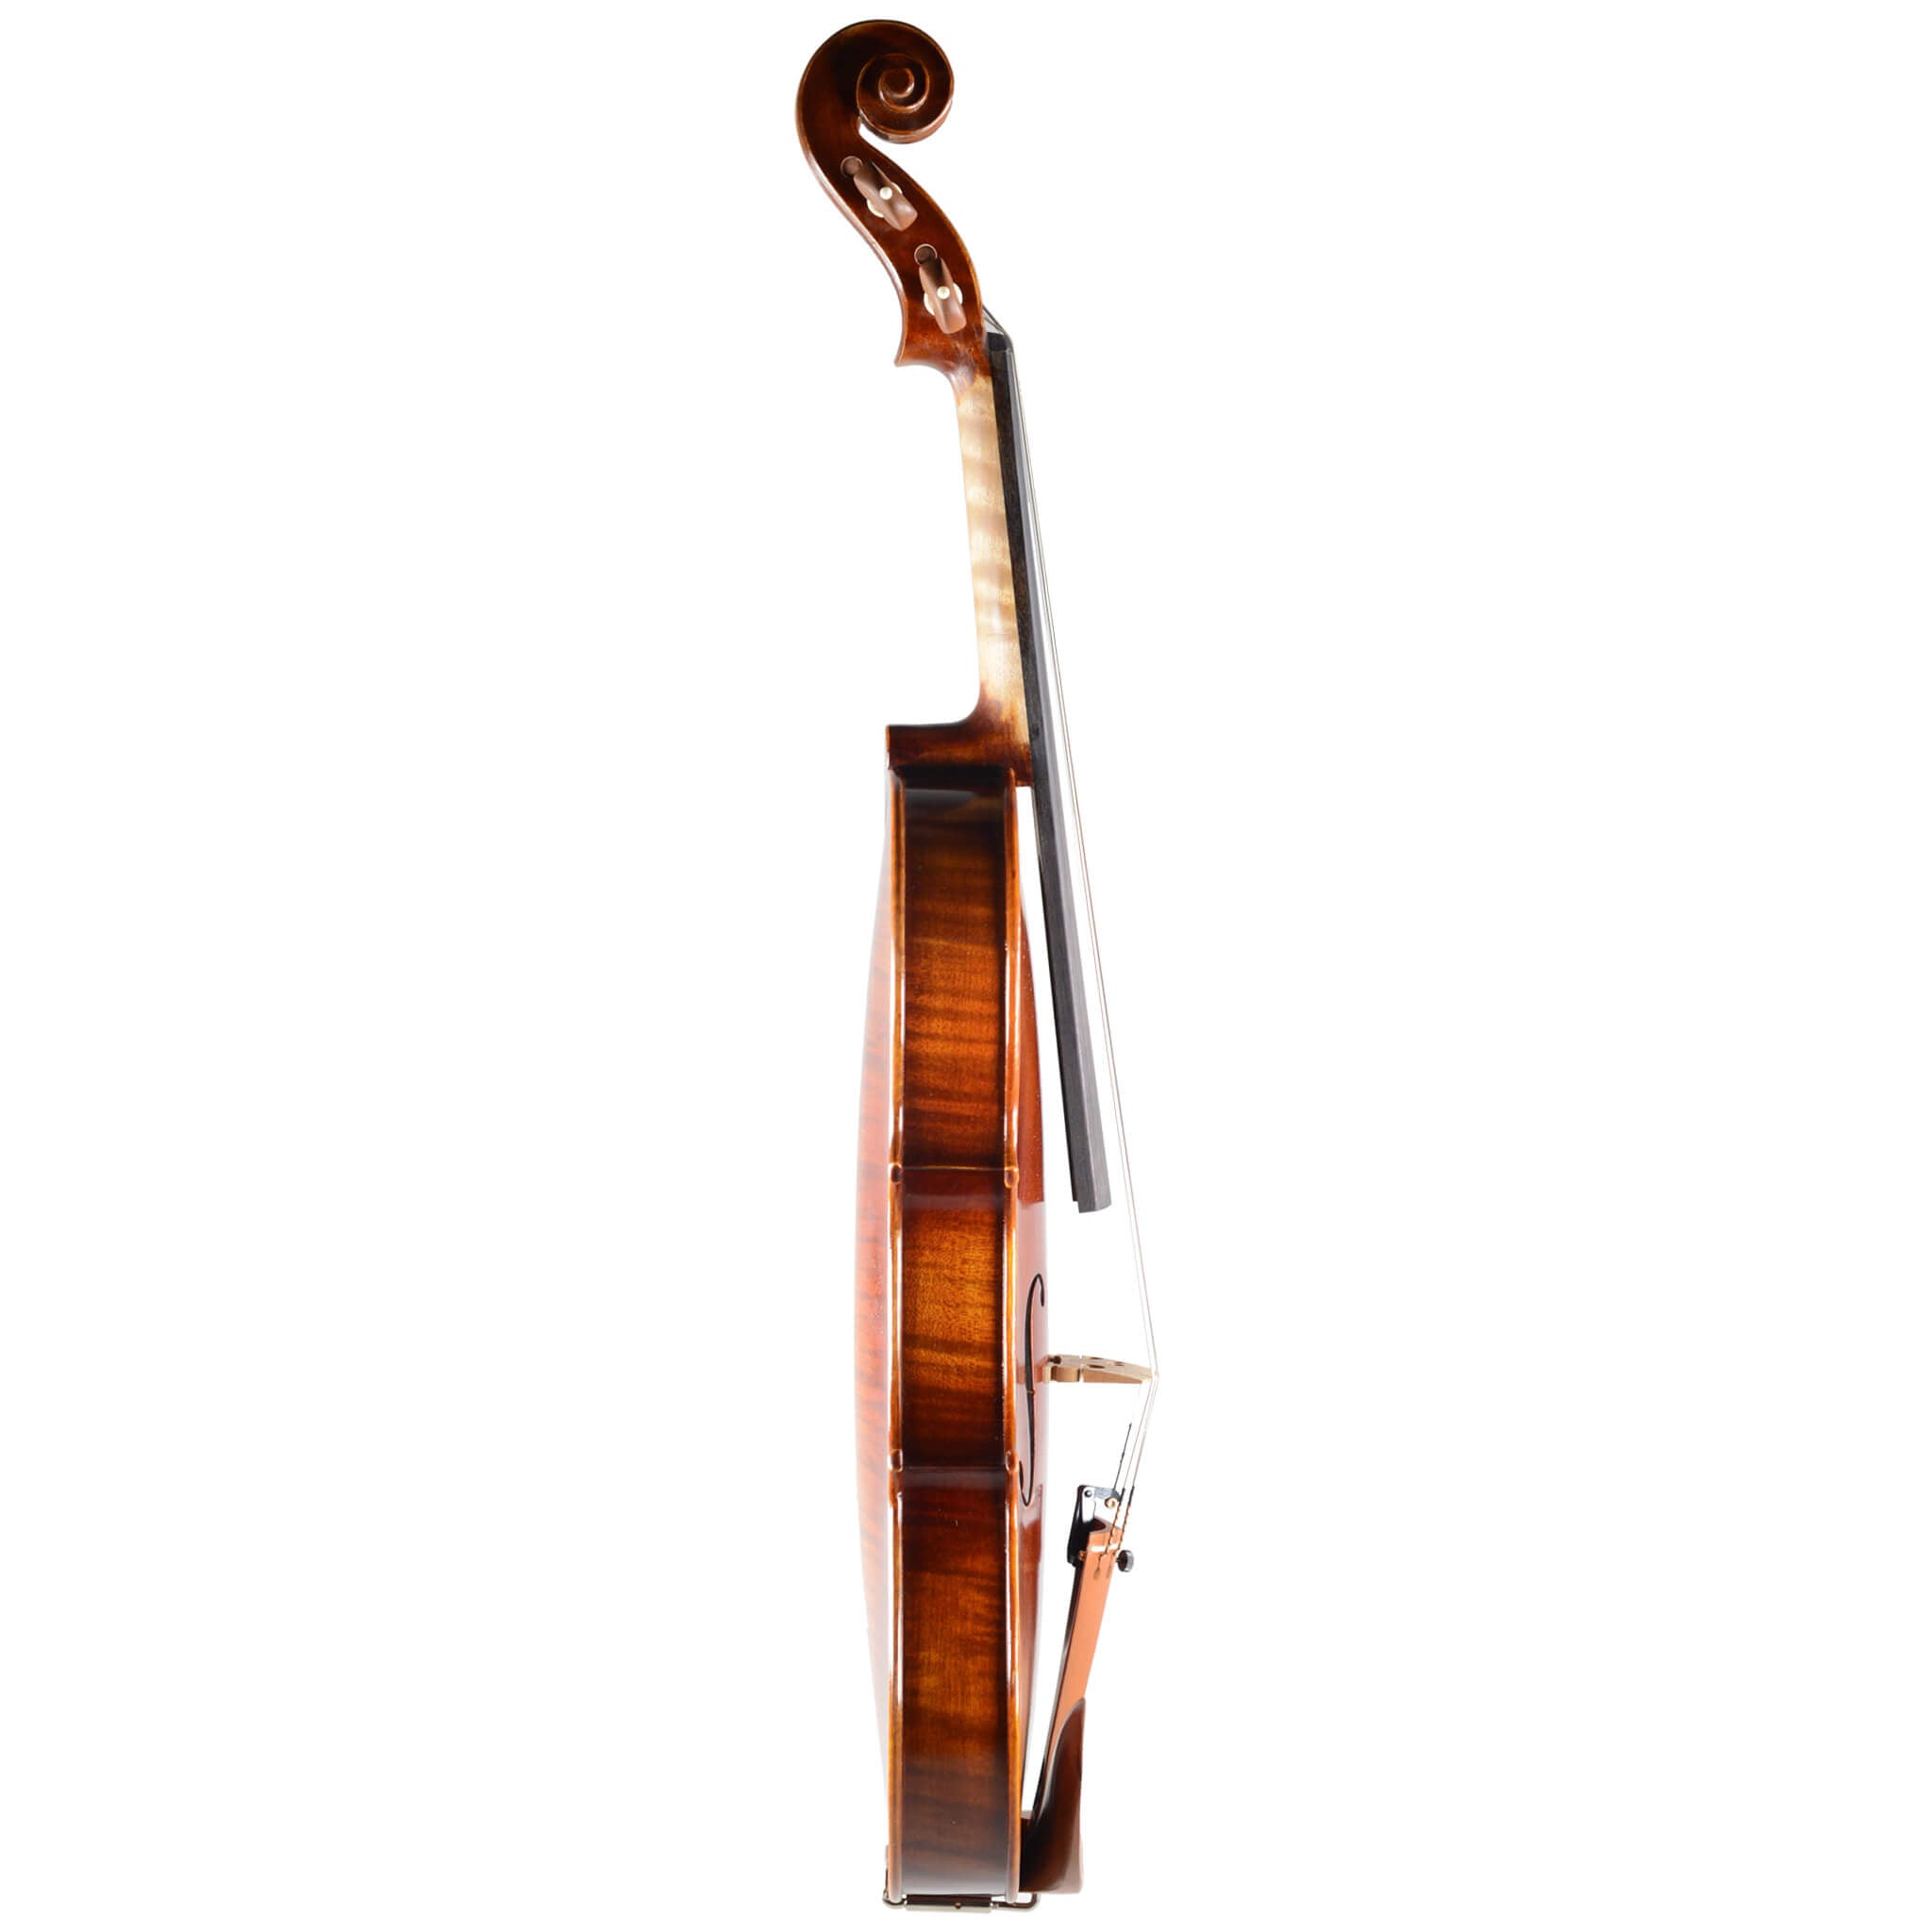 B-Stock Fiddlerman Concert Deluxe Violin Outfit